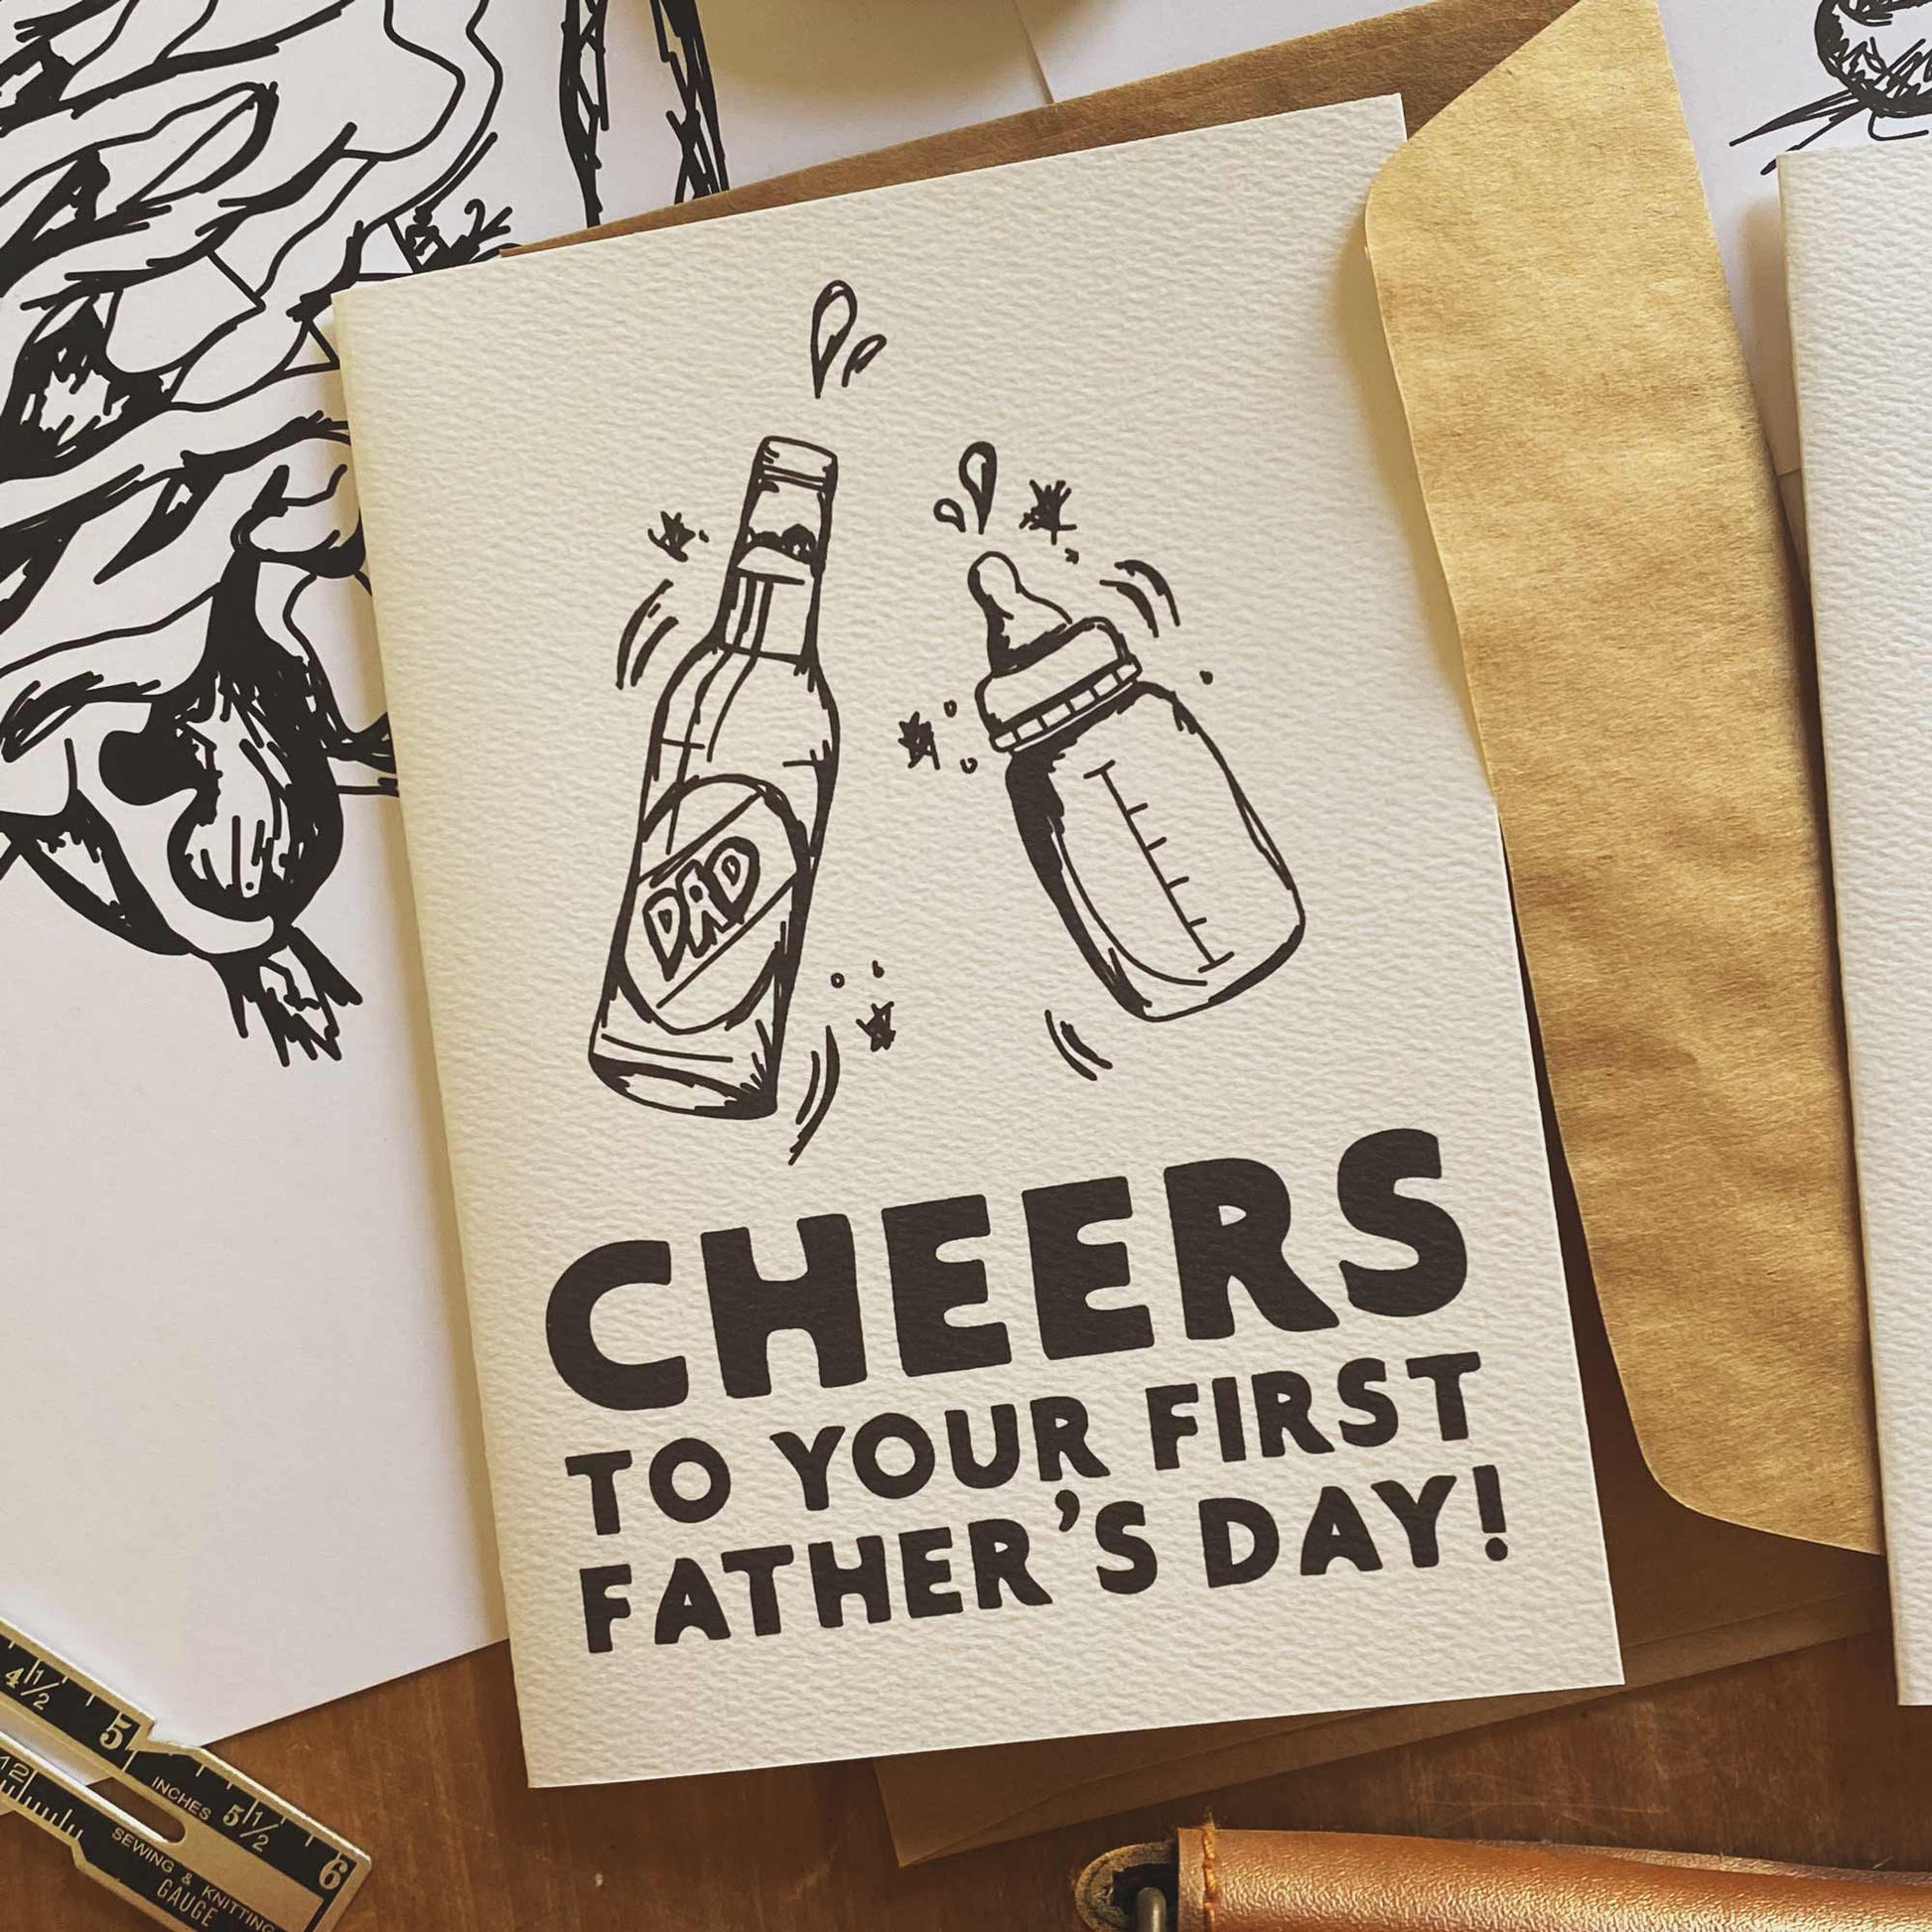 Cheers To Your First Father's Day Greeting Card By Brisbane Illustrator Sheridan Eveline